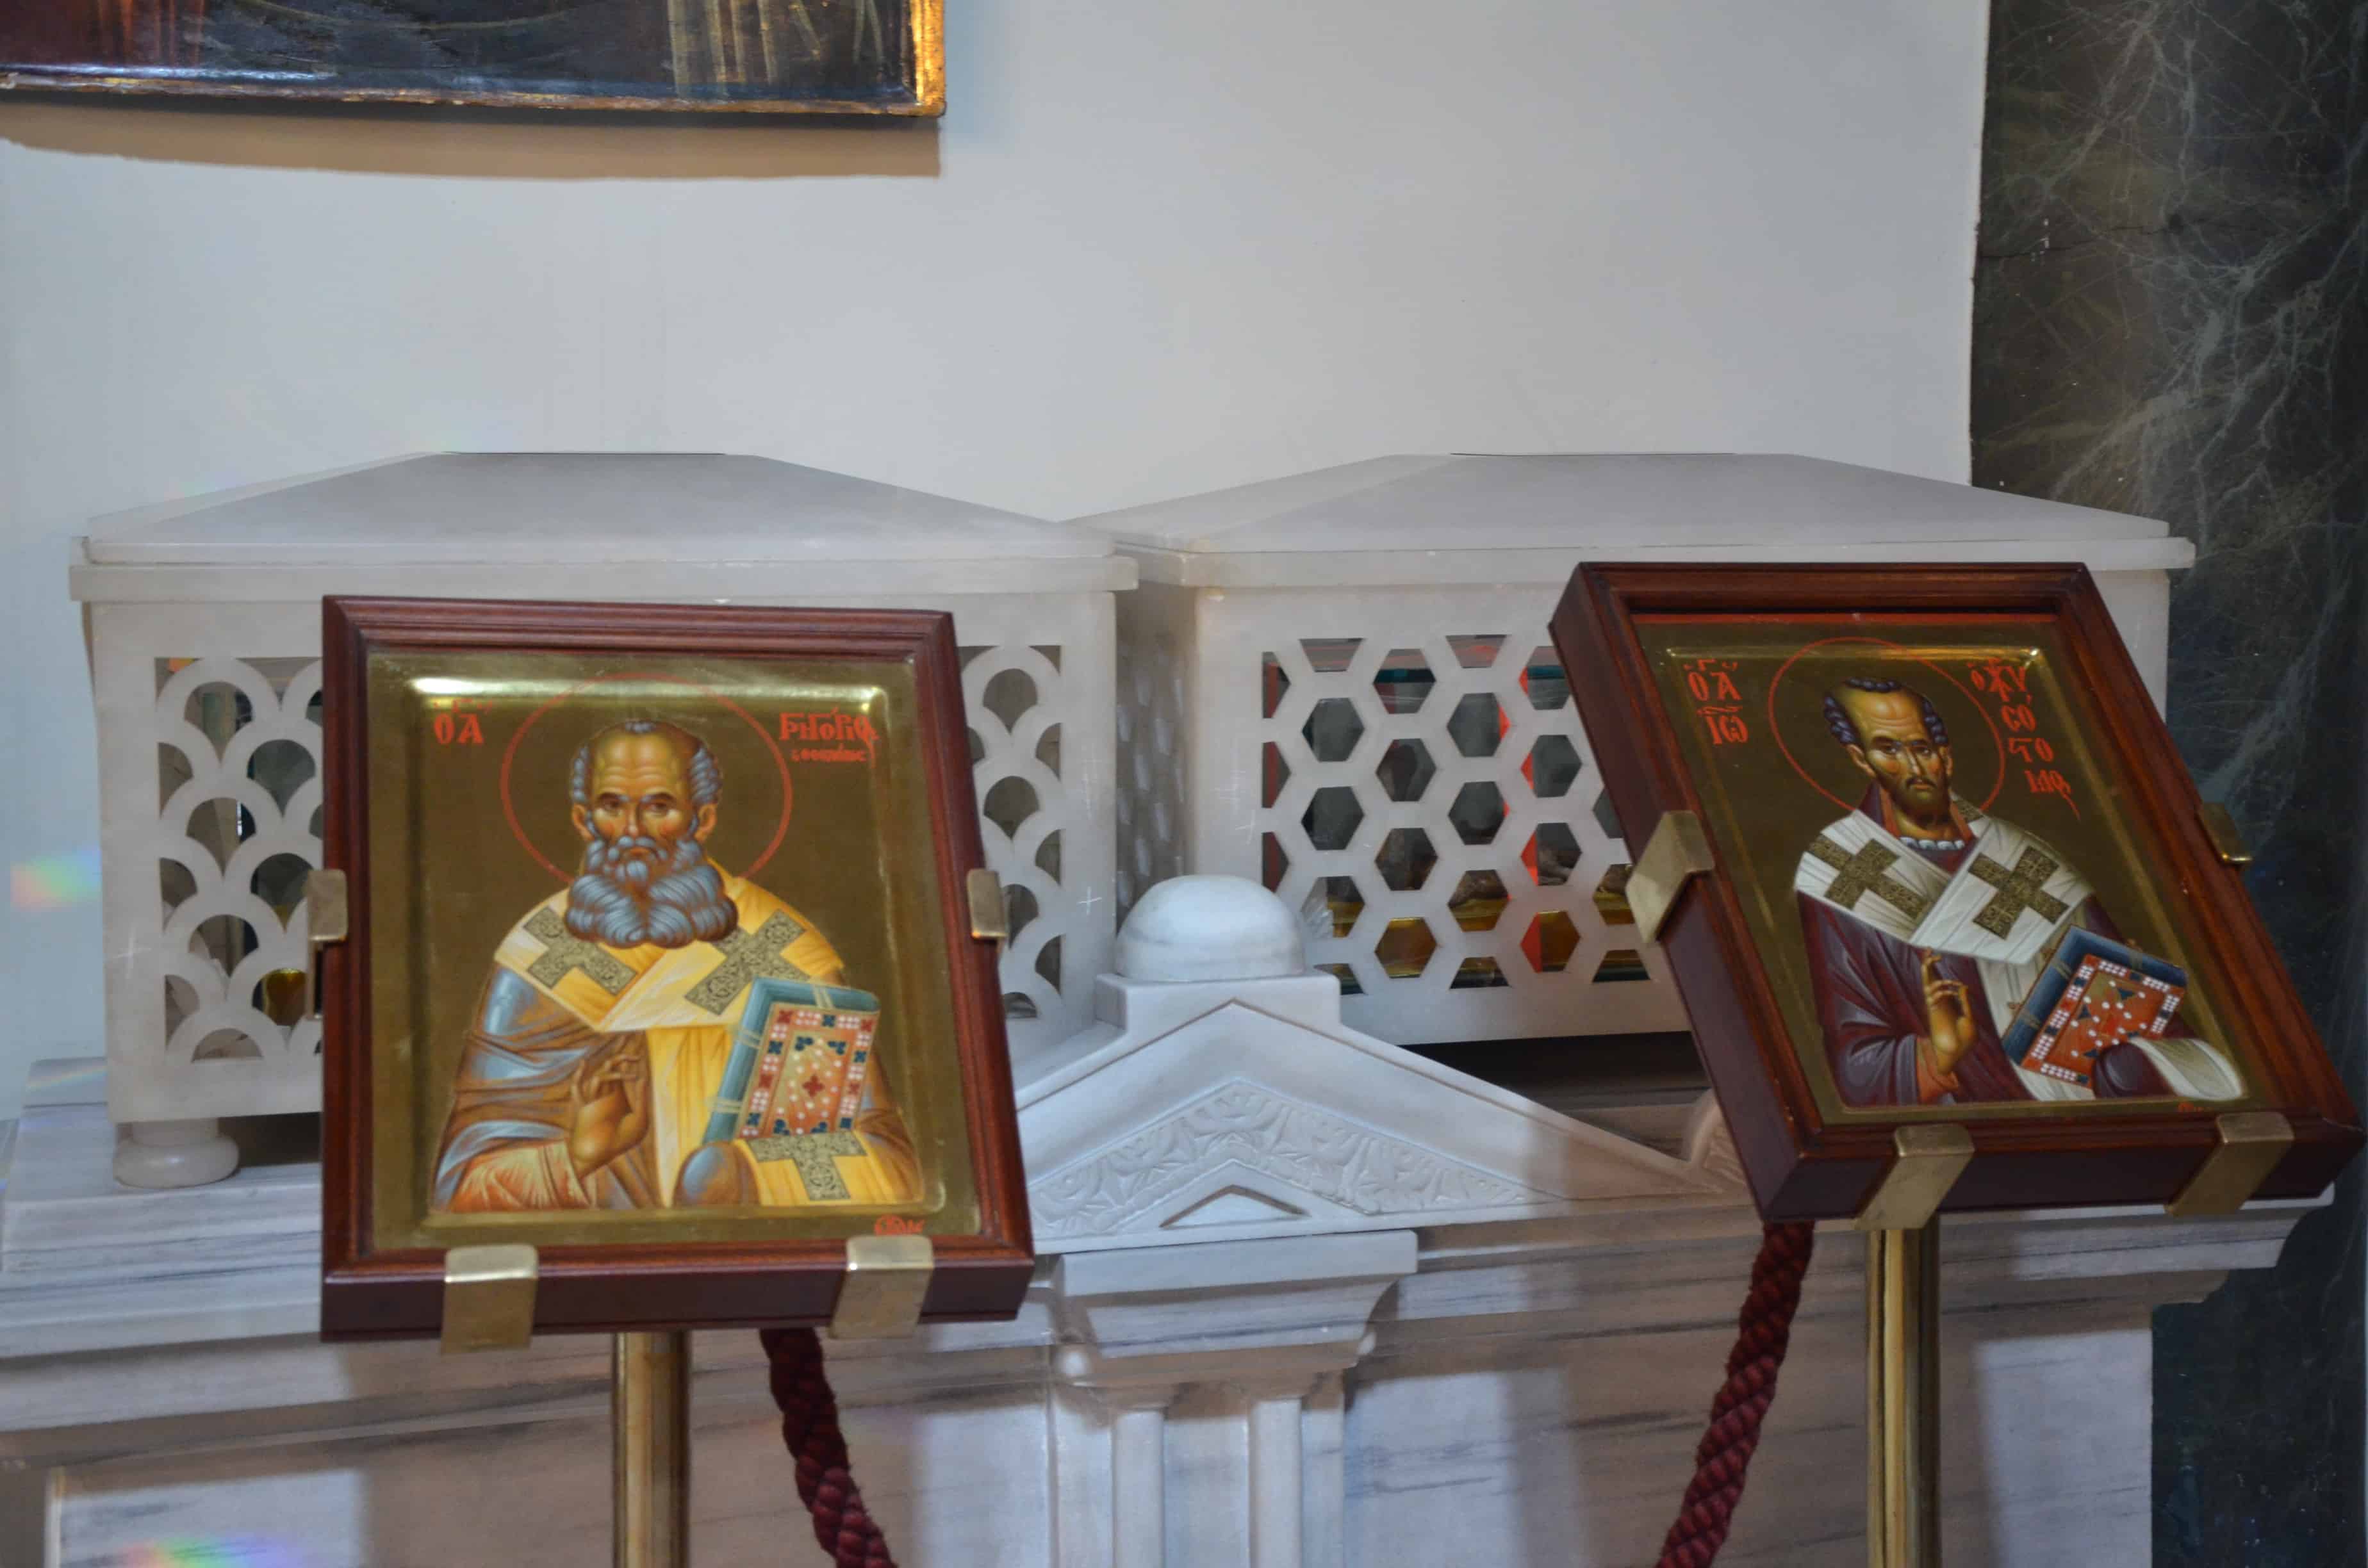 Relics of St. Gregory the Theologian and St. John Chrysostom at the Church of St. George at the Ecumenical Patriarchate of Constantinople in Fener, Istanbul, Turkey